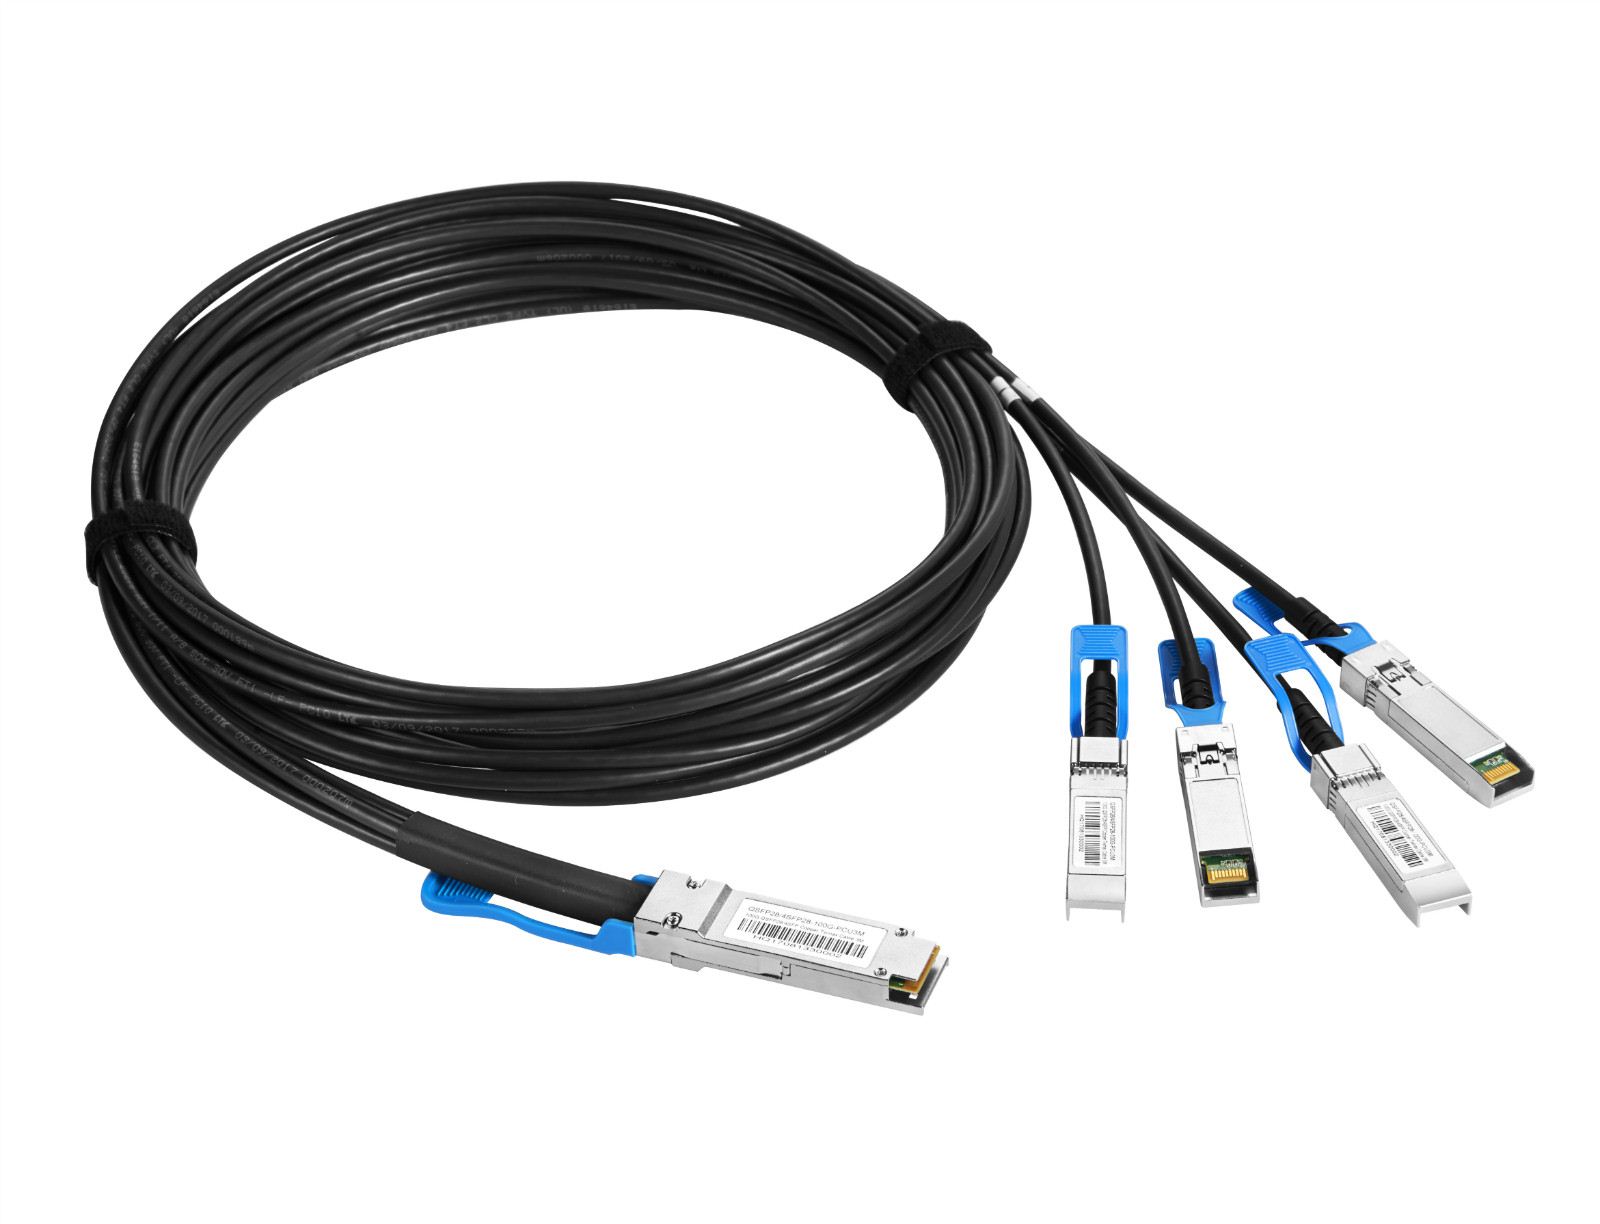 HTD-InforQSFP28 DAC Cables, a professional one-stop service